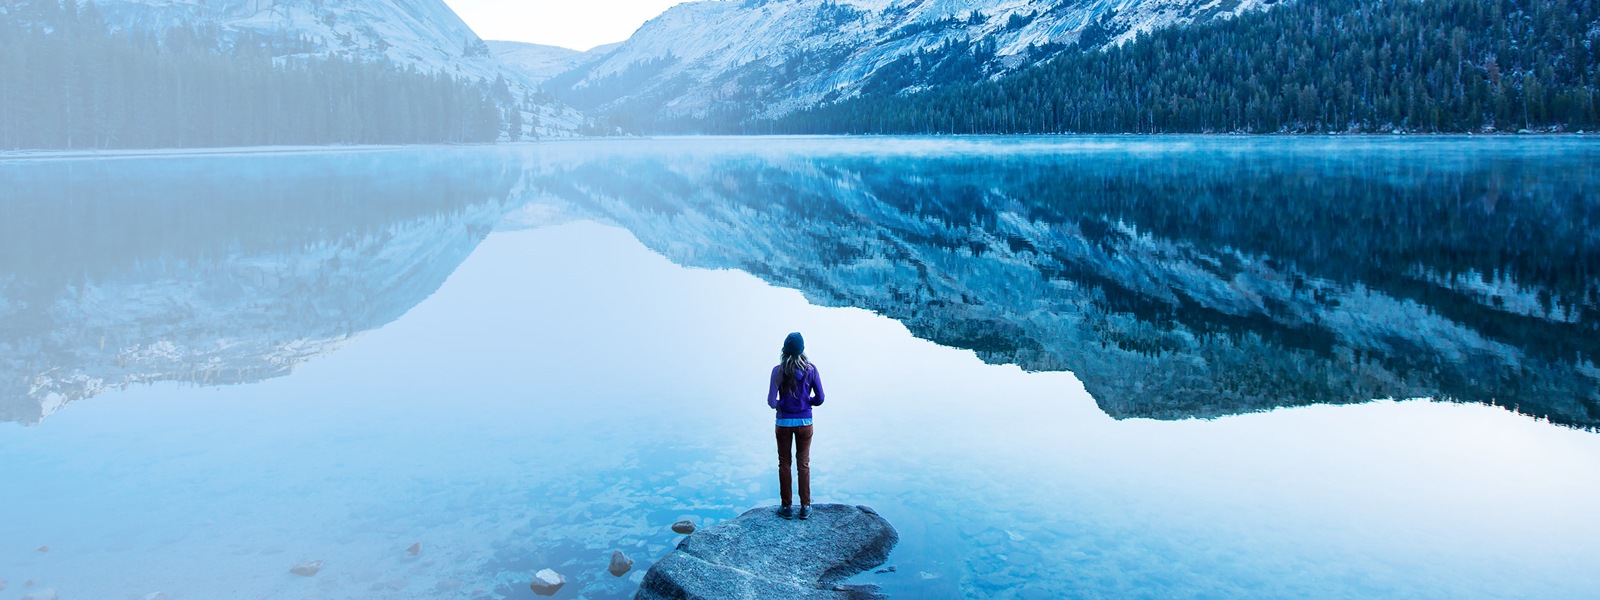 Woman stands on the shore of a lake surrounded by snowy mountains